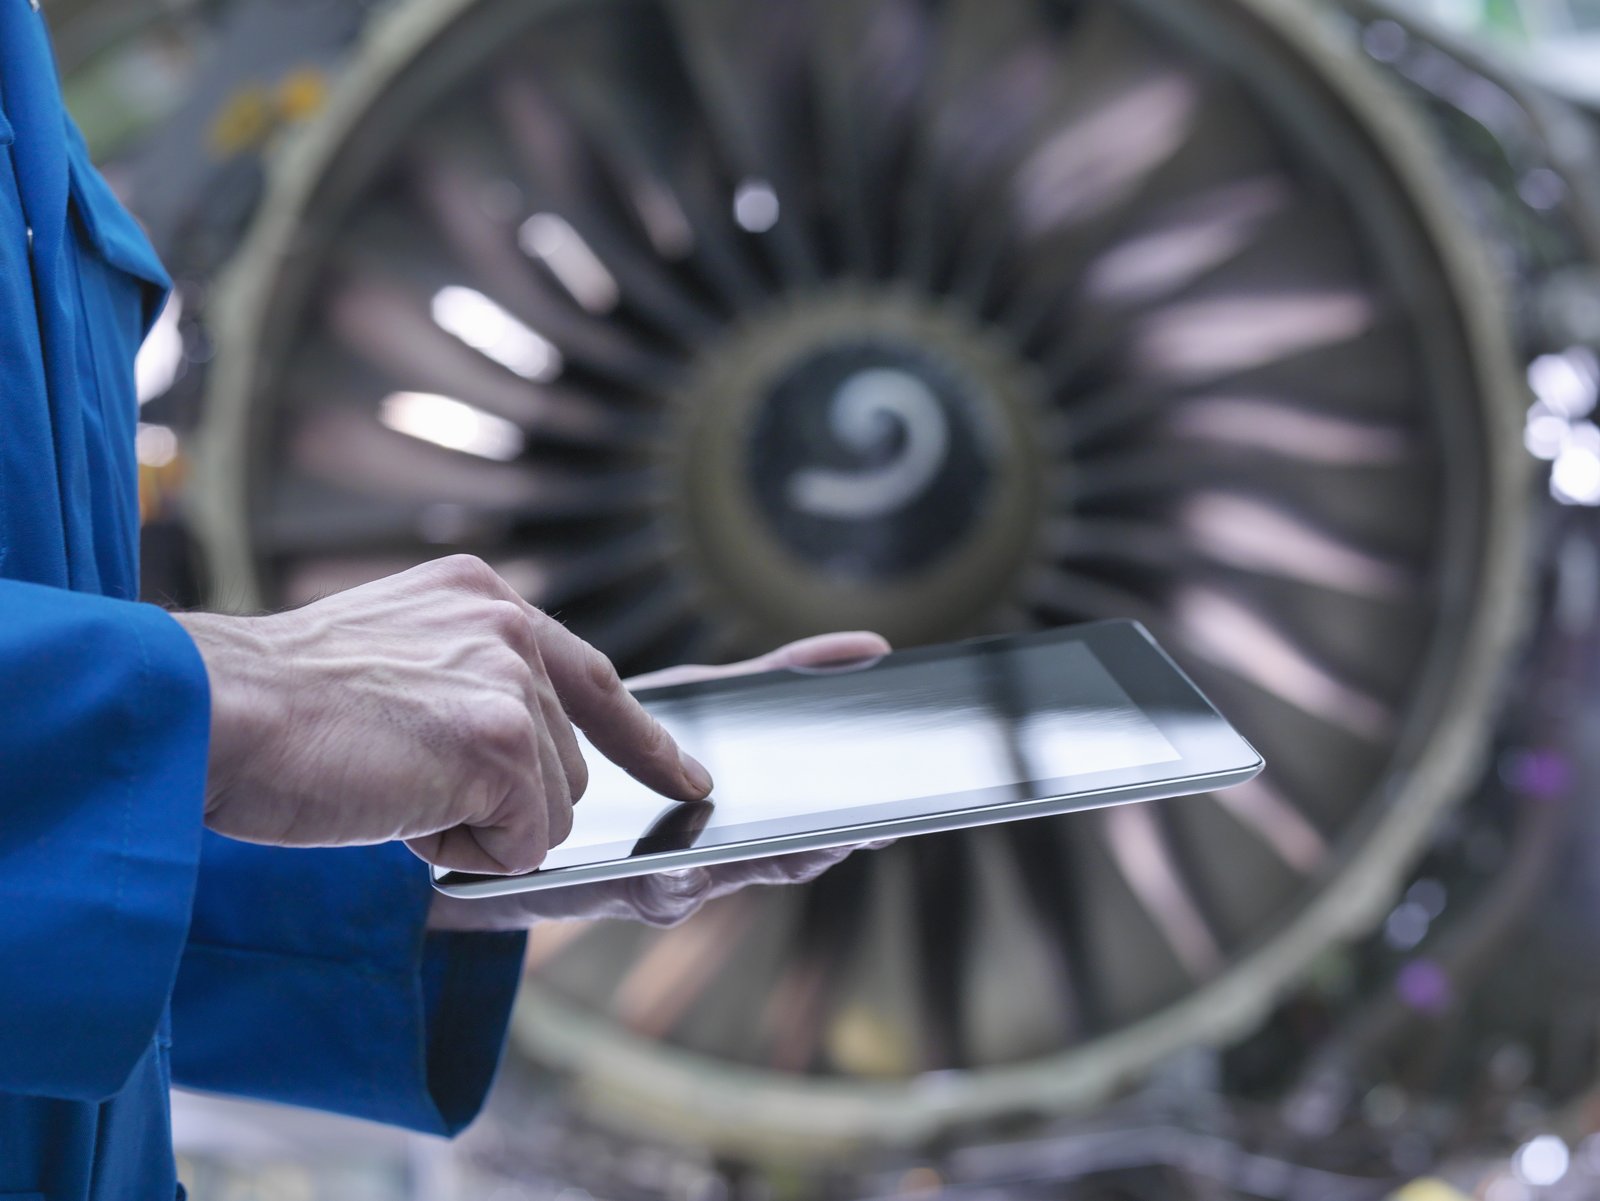 Engineer using digital tablet in front of jet engine in aircraft maintenance factory